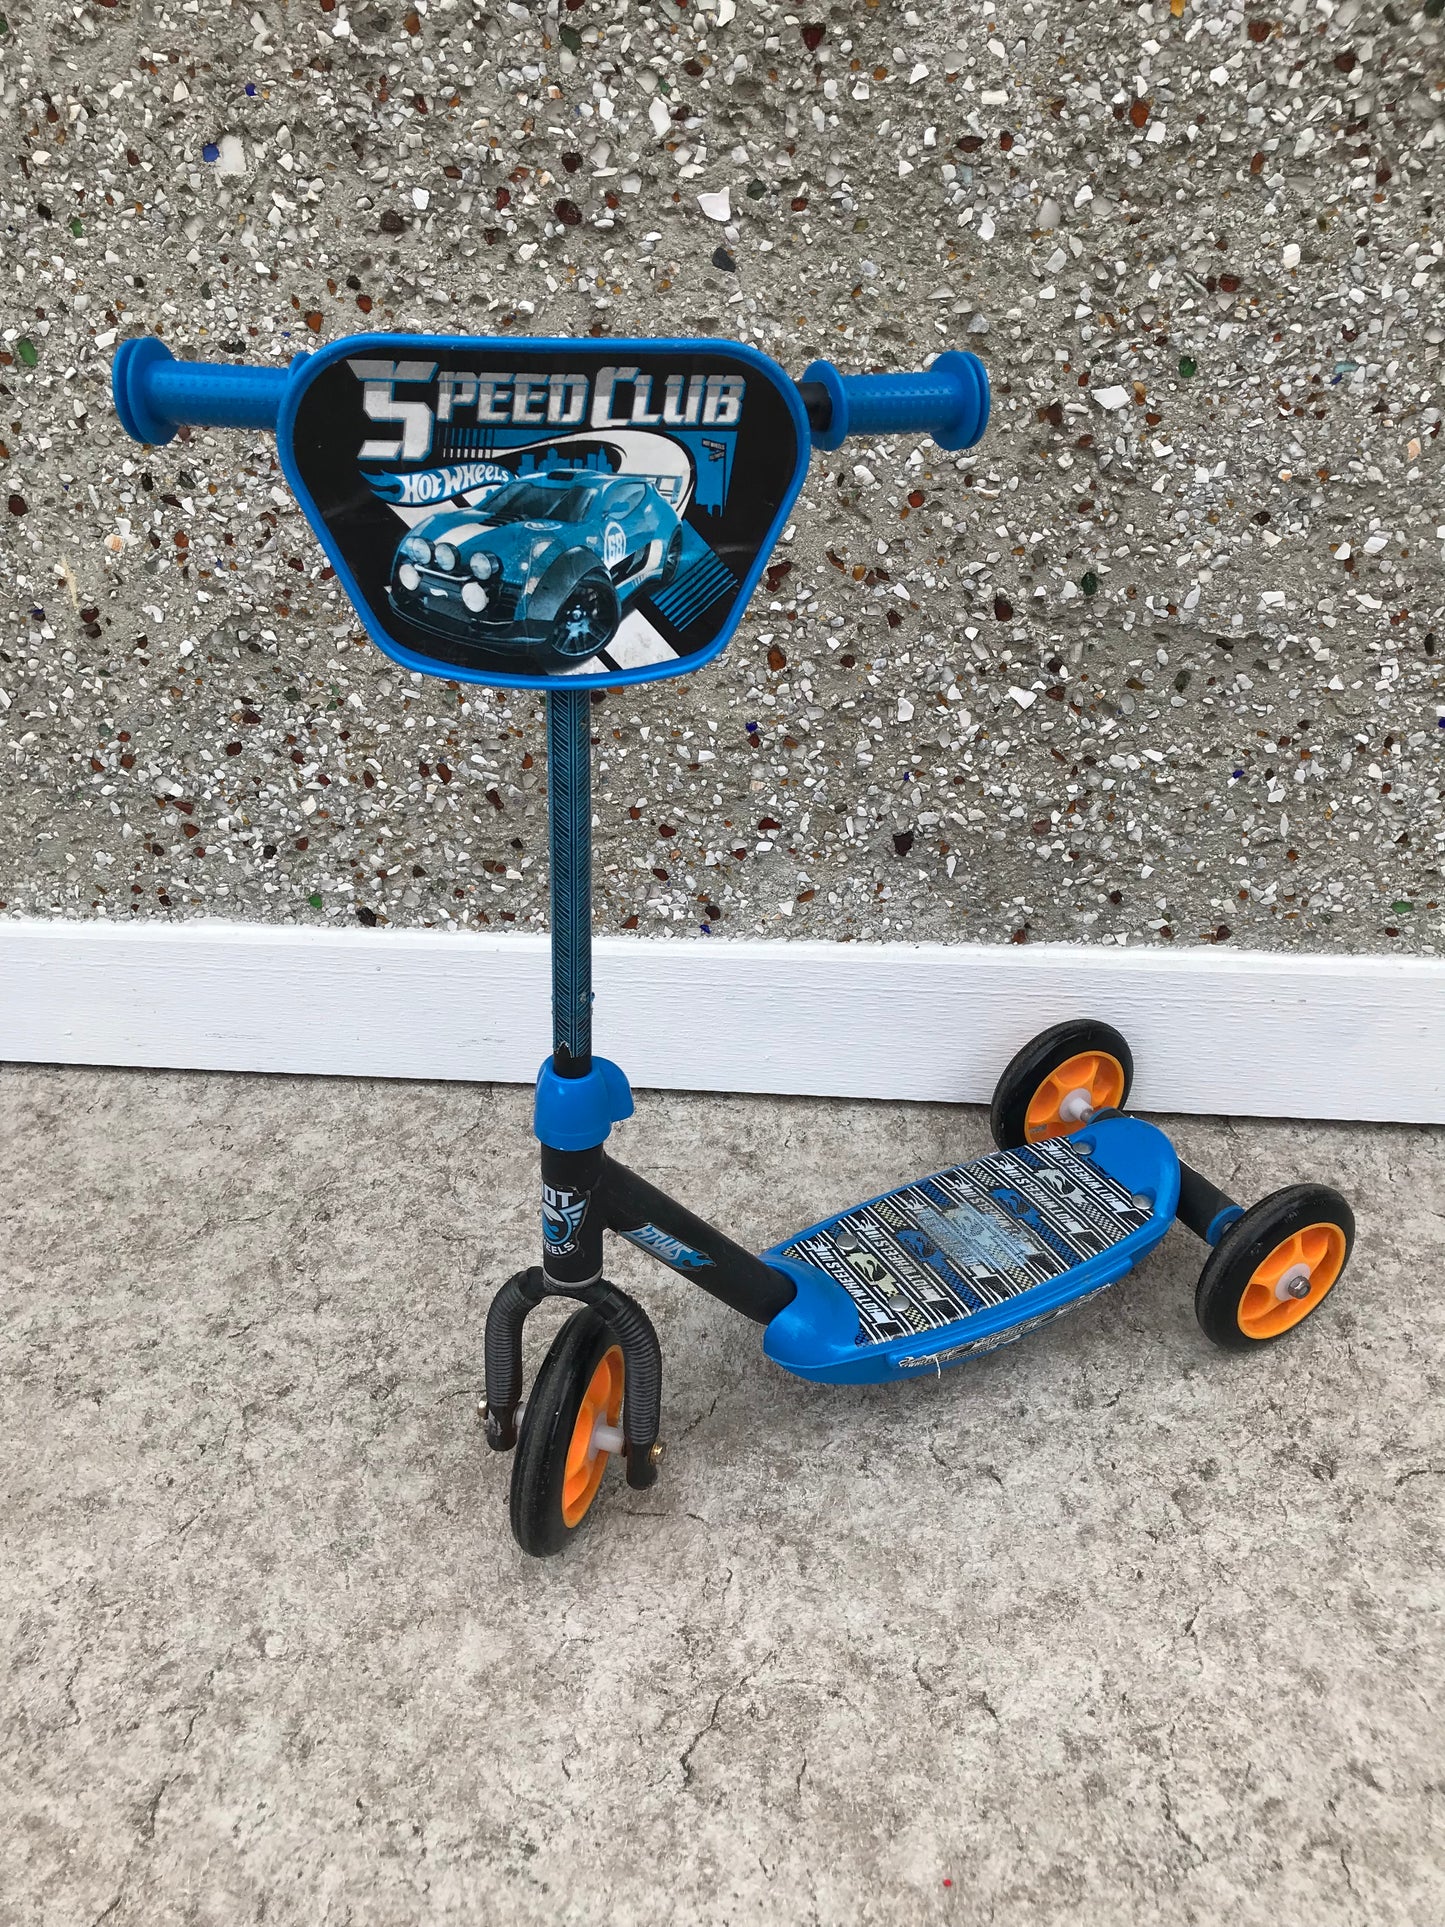 Scooter Child Size 4-7 Speed Racer 3 Wheels Blue Excellent